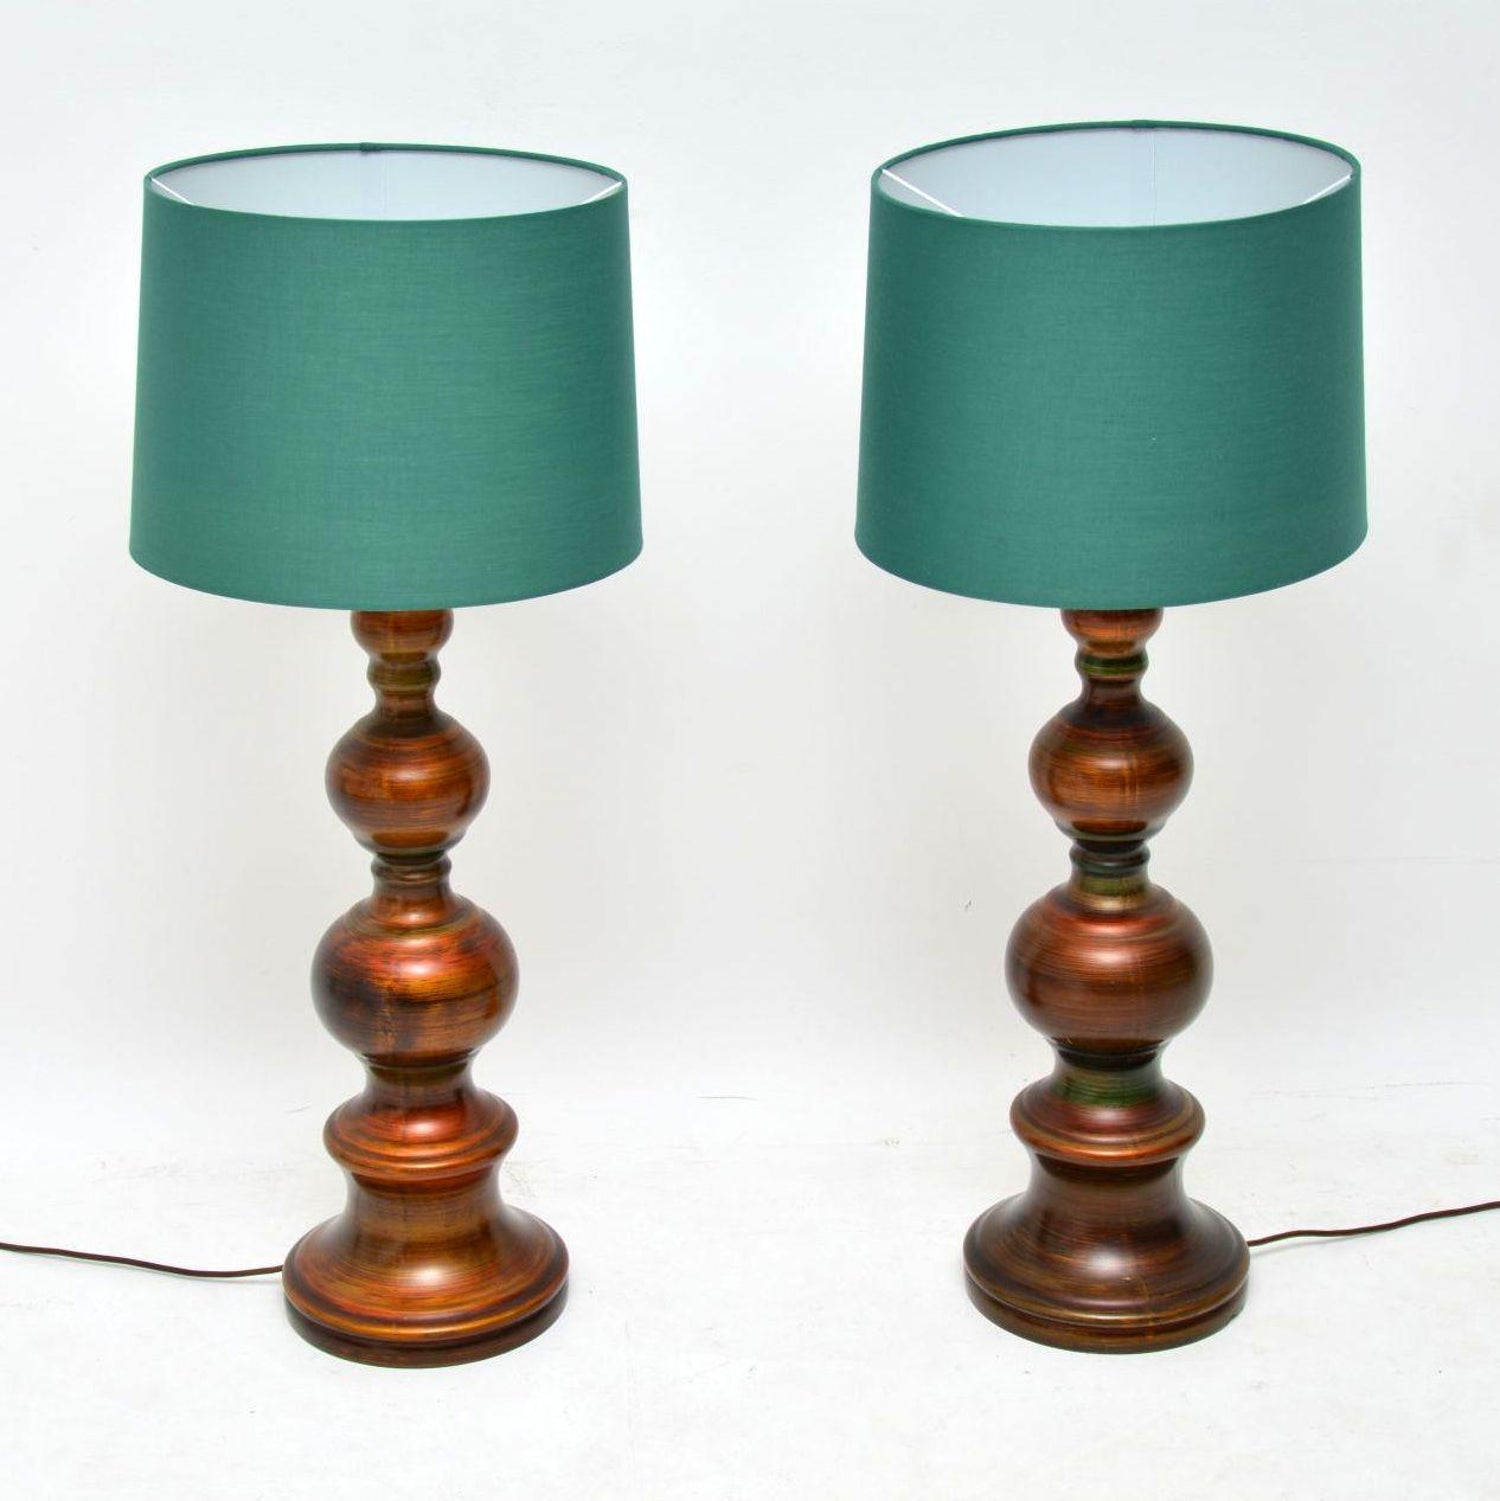 Bedroom Lamps Vintage Home Decor 1980s, Vintage Lamp Shades For Table Lamps